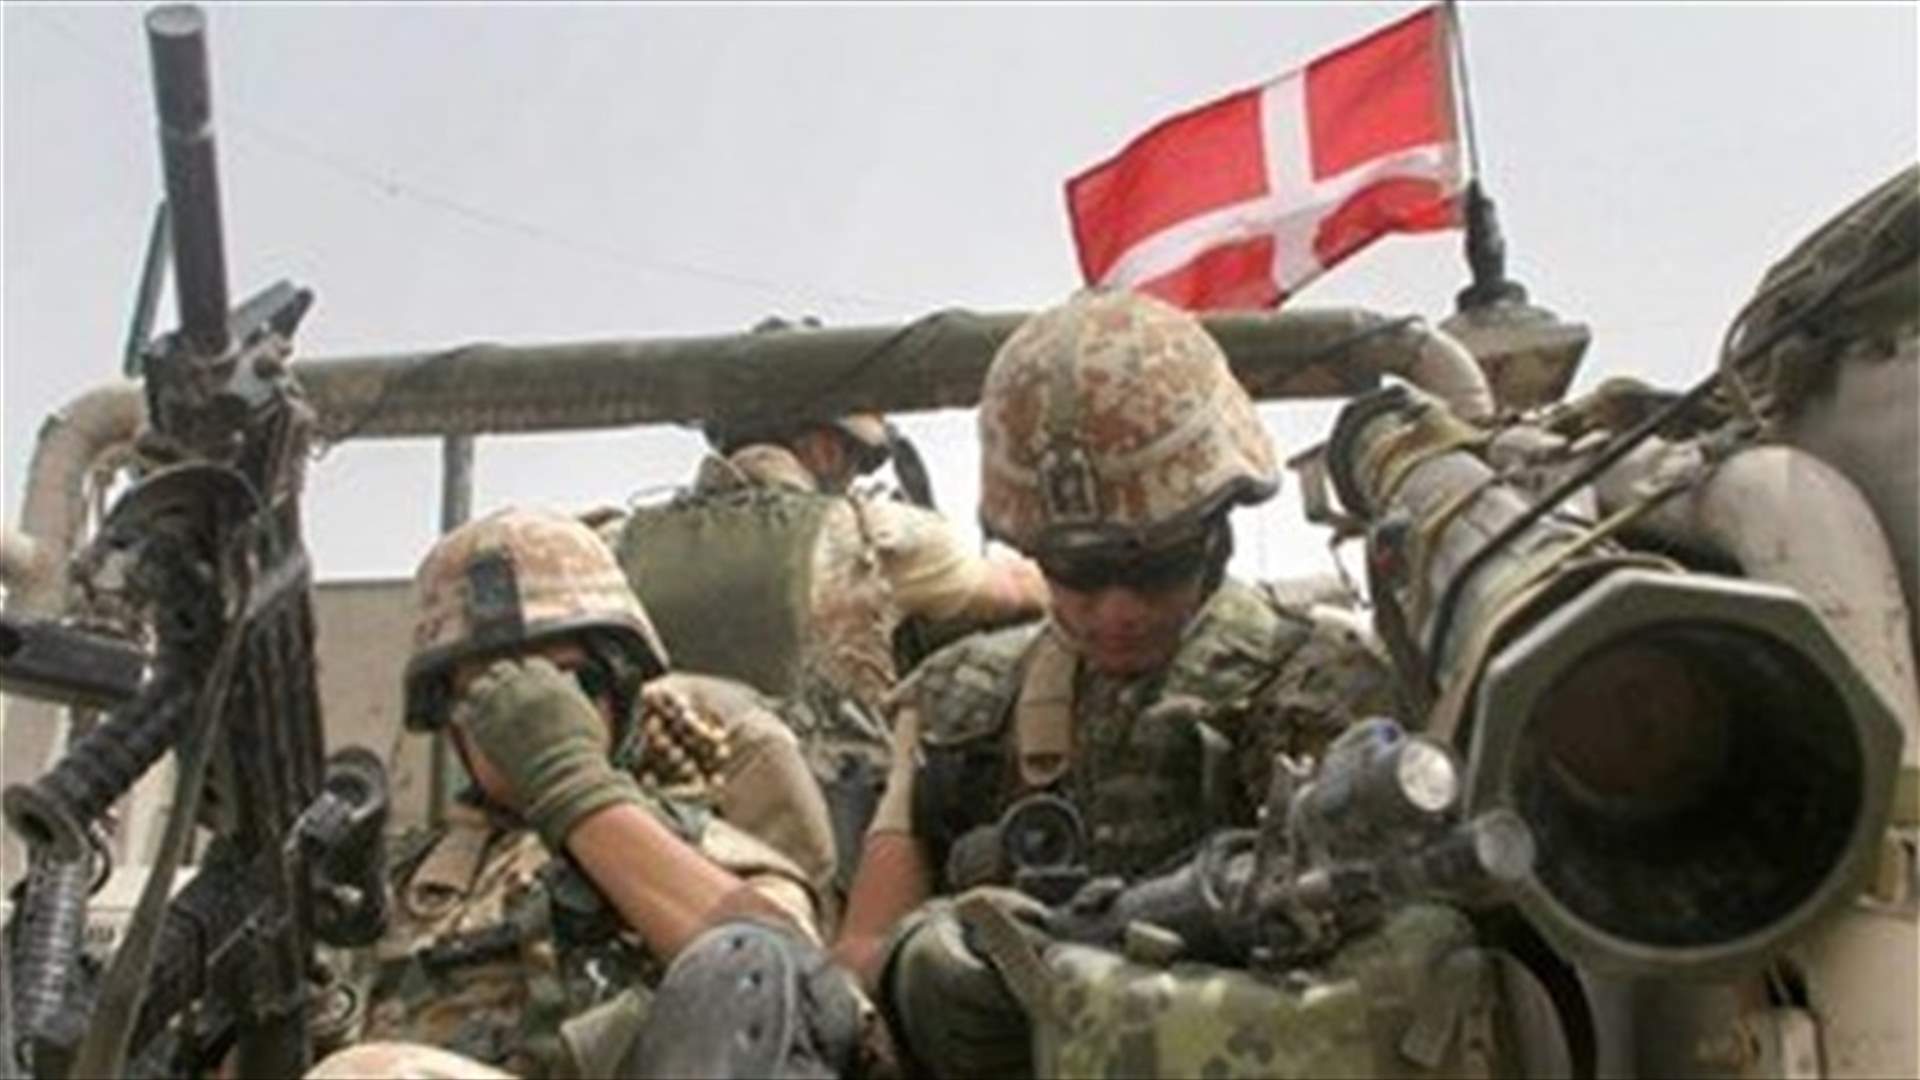 Danish troops to return to Al-Asad air base in Iraq on March 1